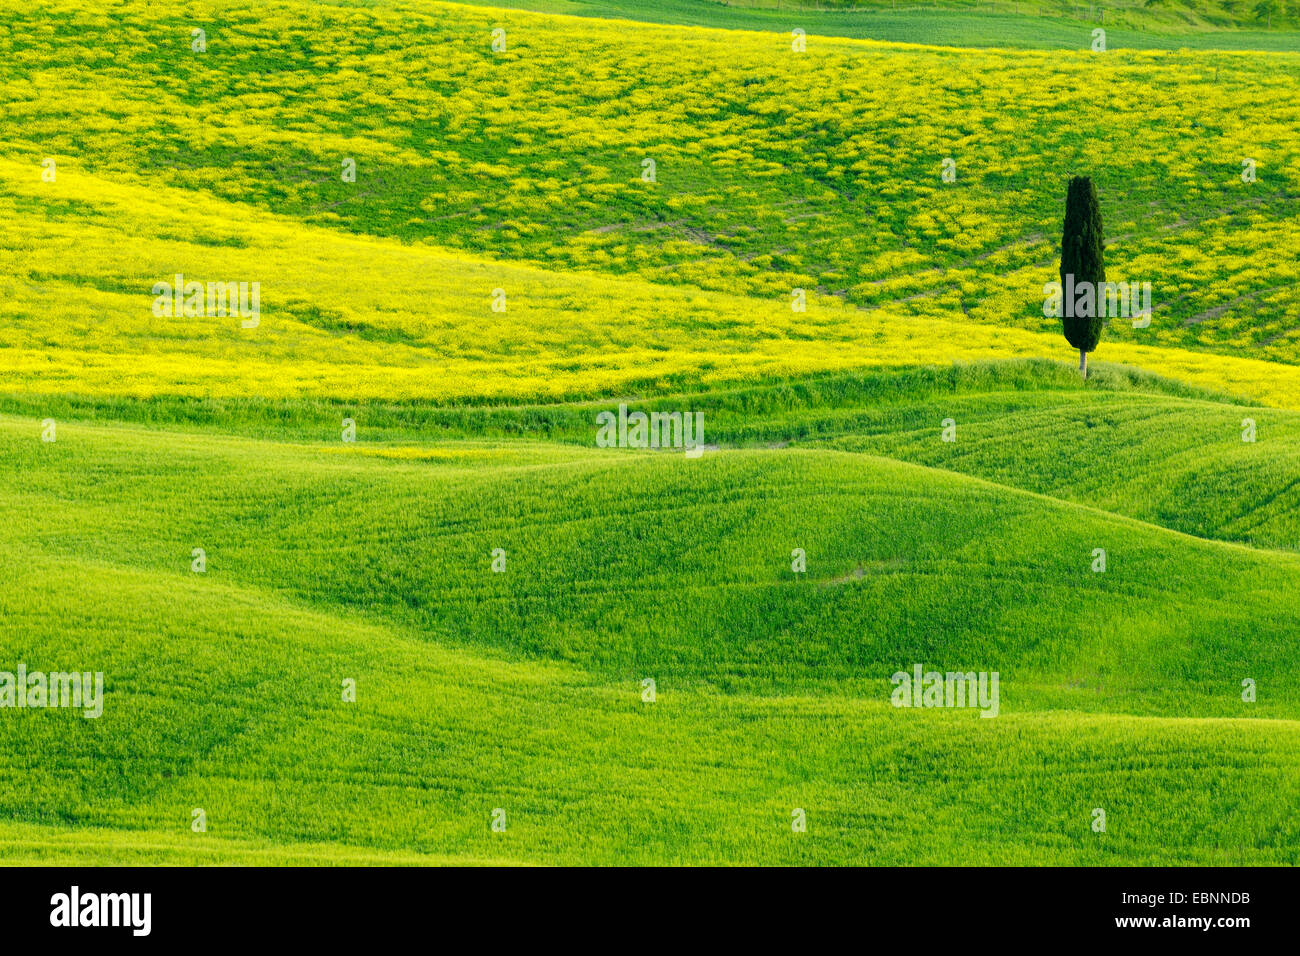 Italian cypress (Cupressus sempervirens), Green and Hilly Farmland with Cypress, Val d' Orcia, San Quirico d' Orcia, Italy, Tuscany Stock Photo